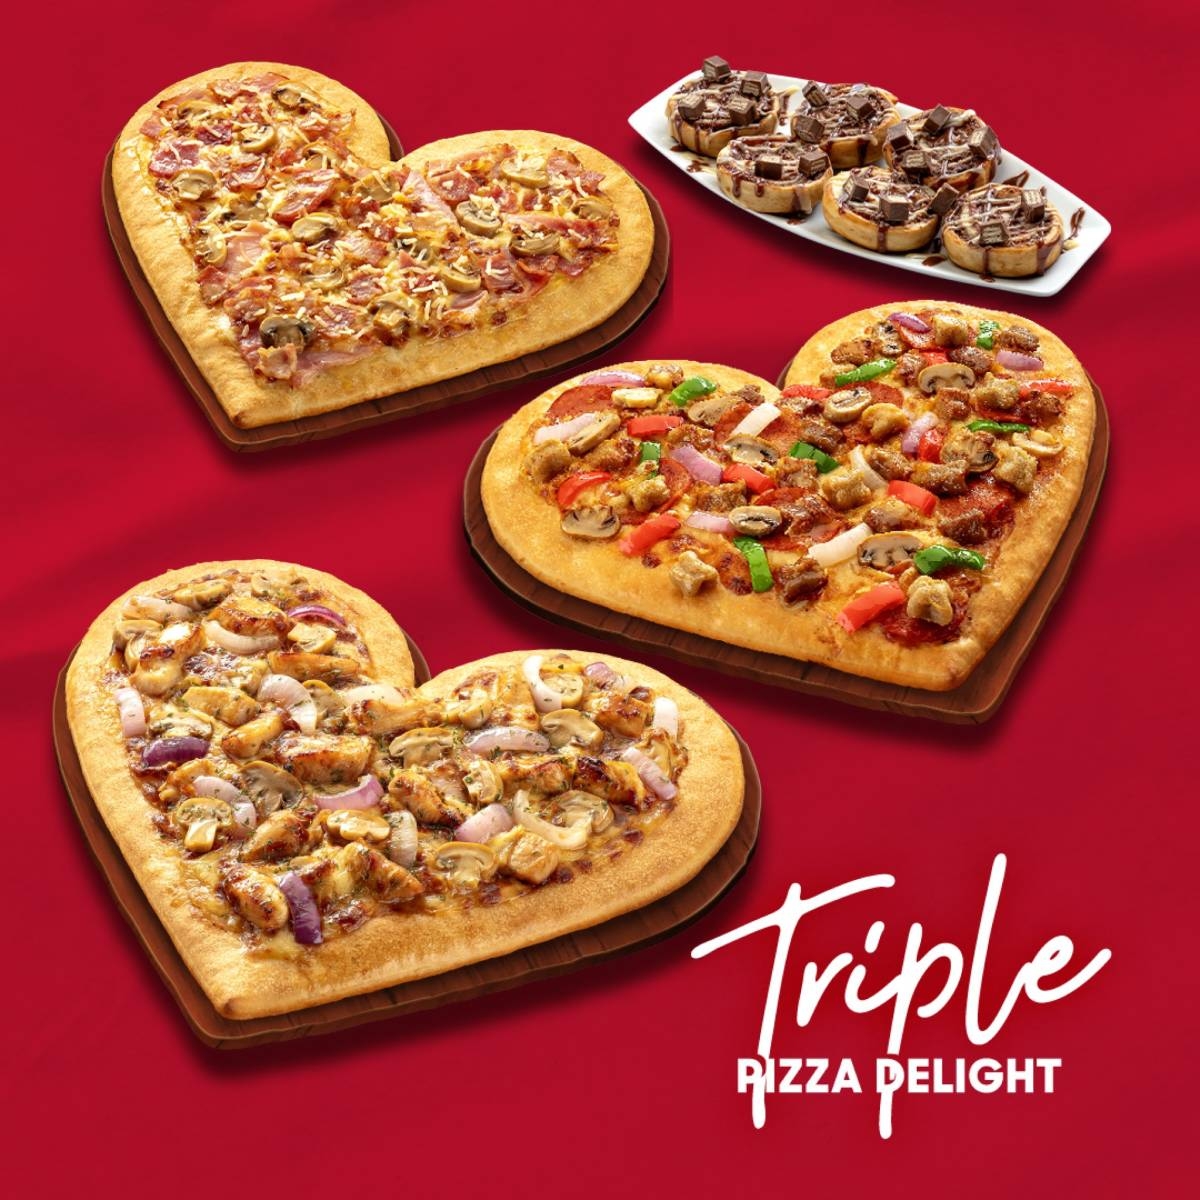 Pizza Hut brings back the Heart-shaped Pan Pizza 